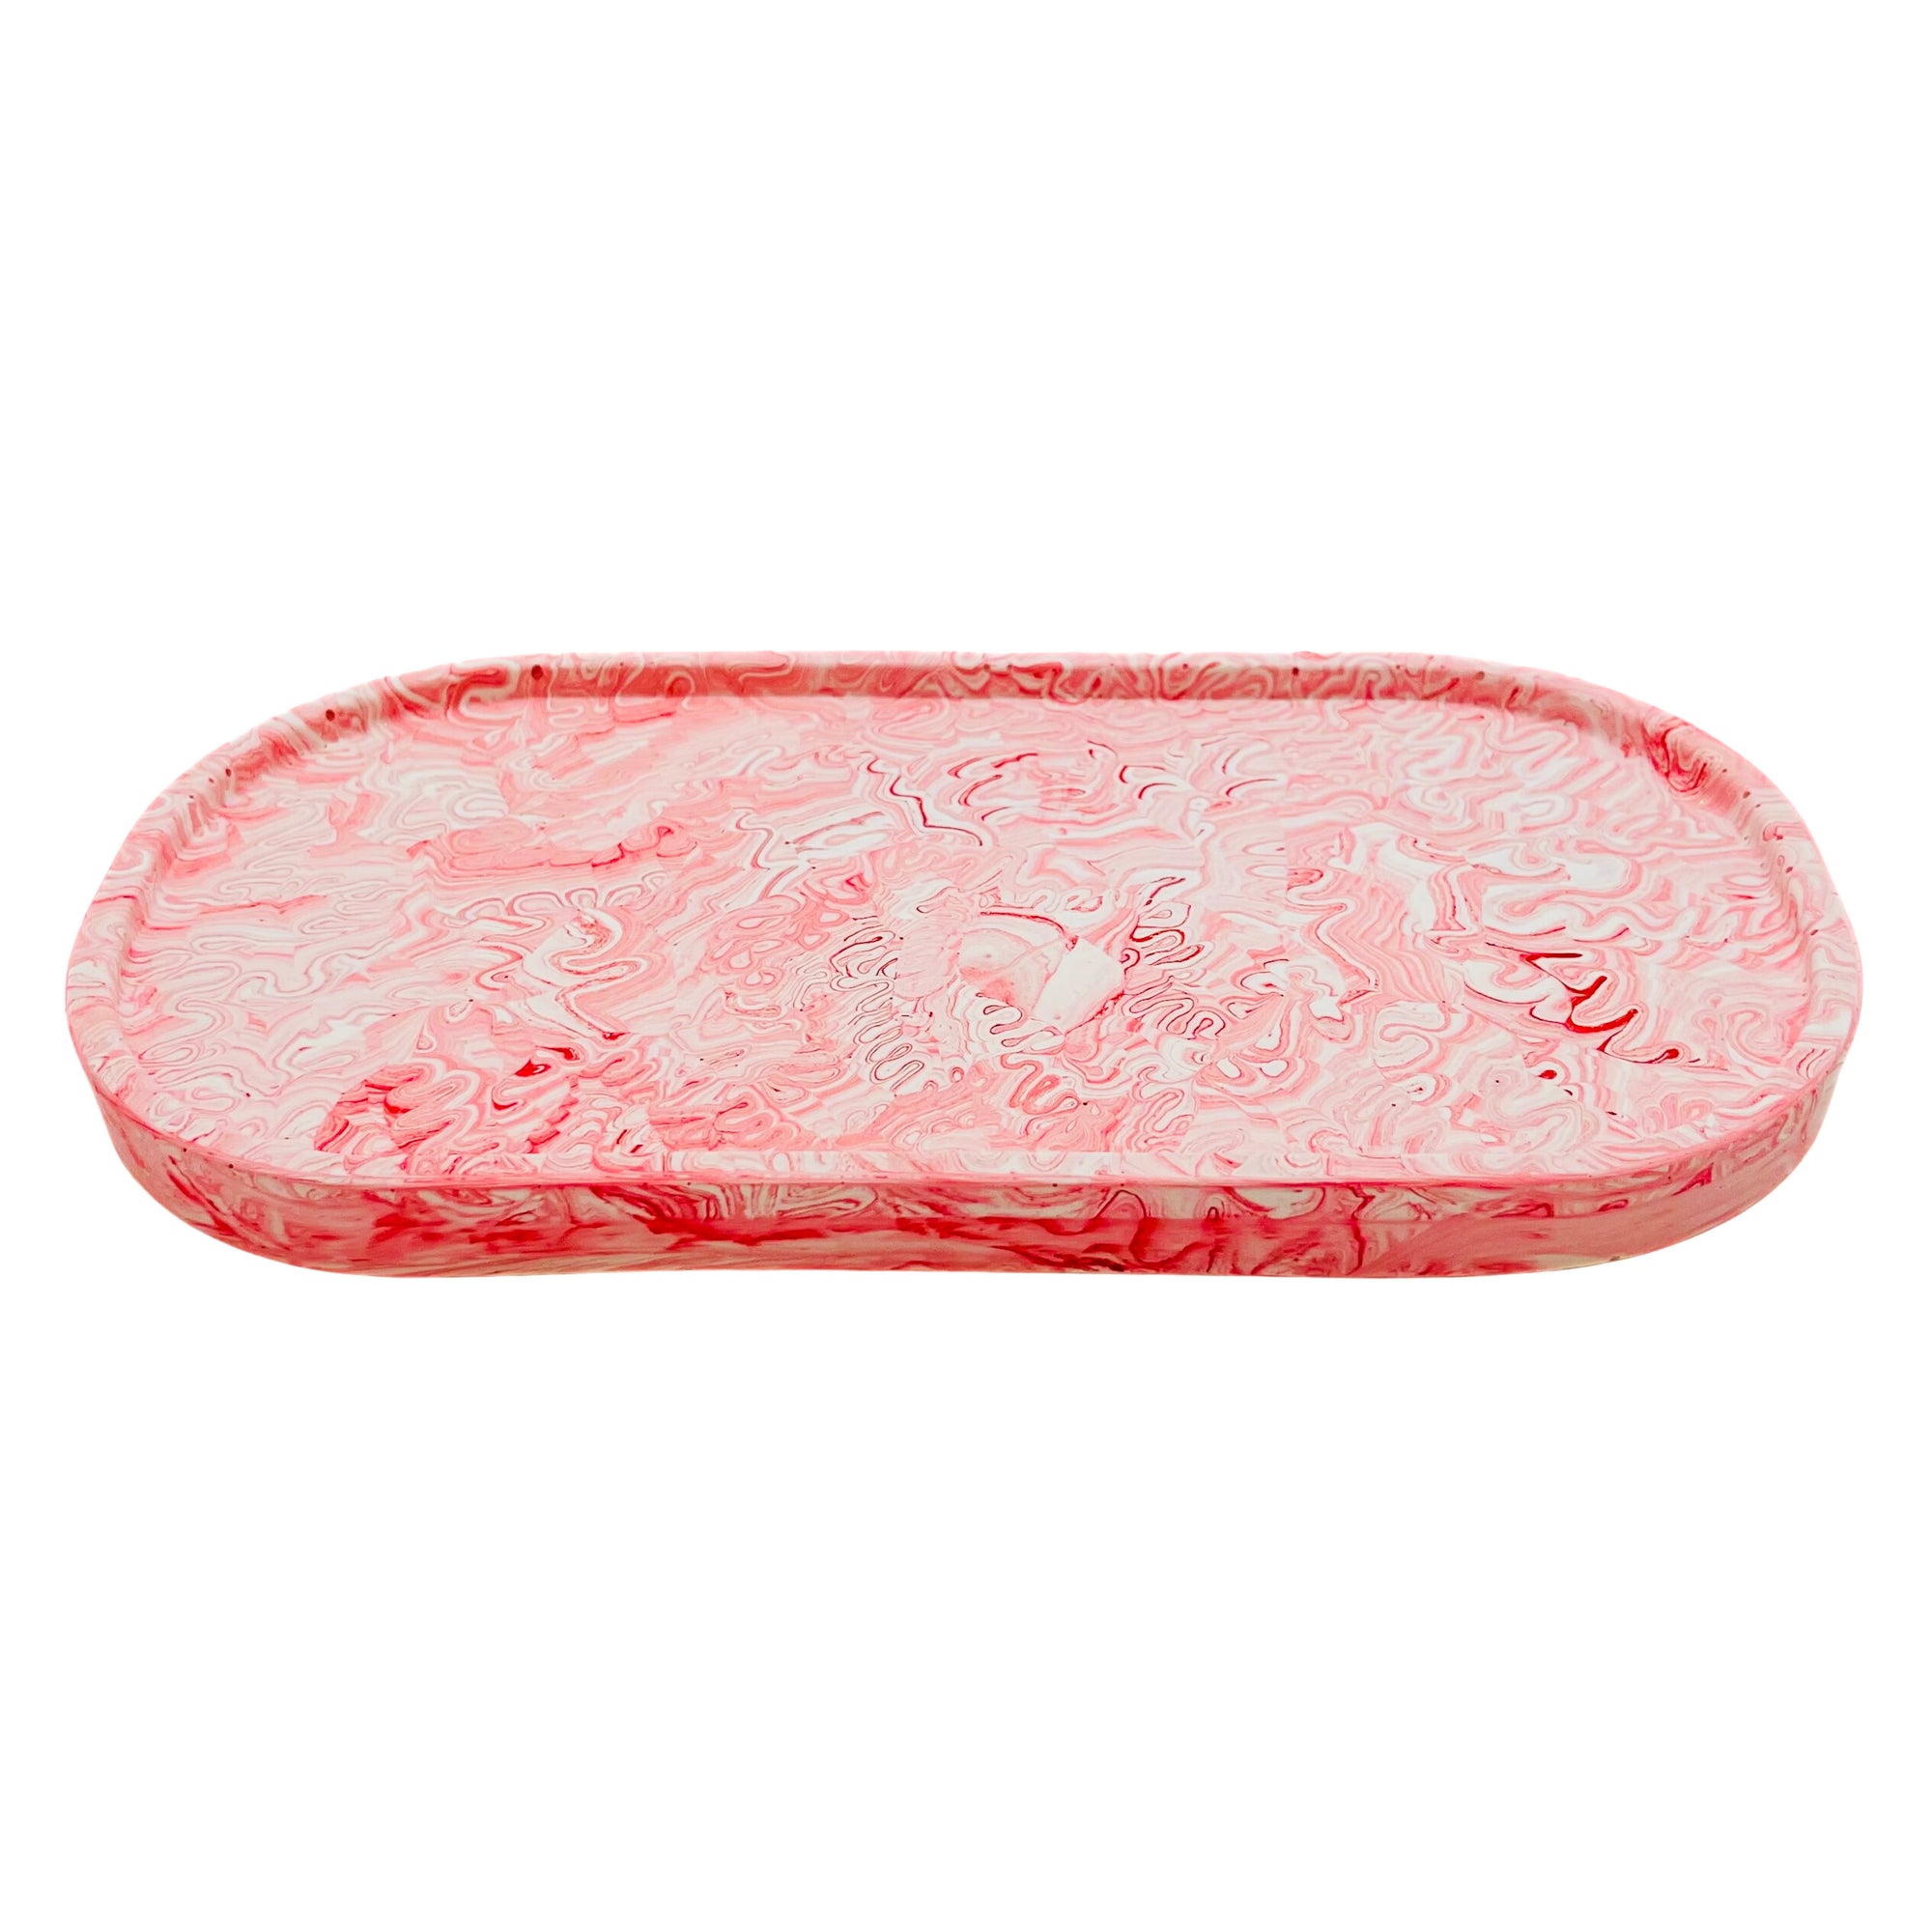 An oval Jesmonite trinket tray marbled with red pigment.